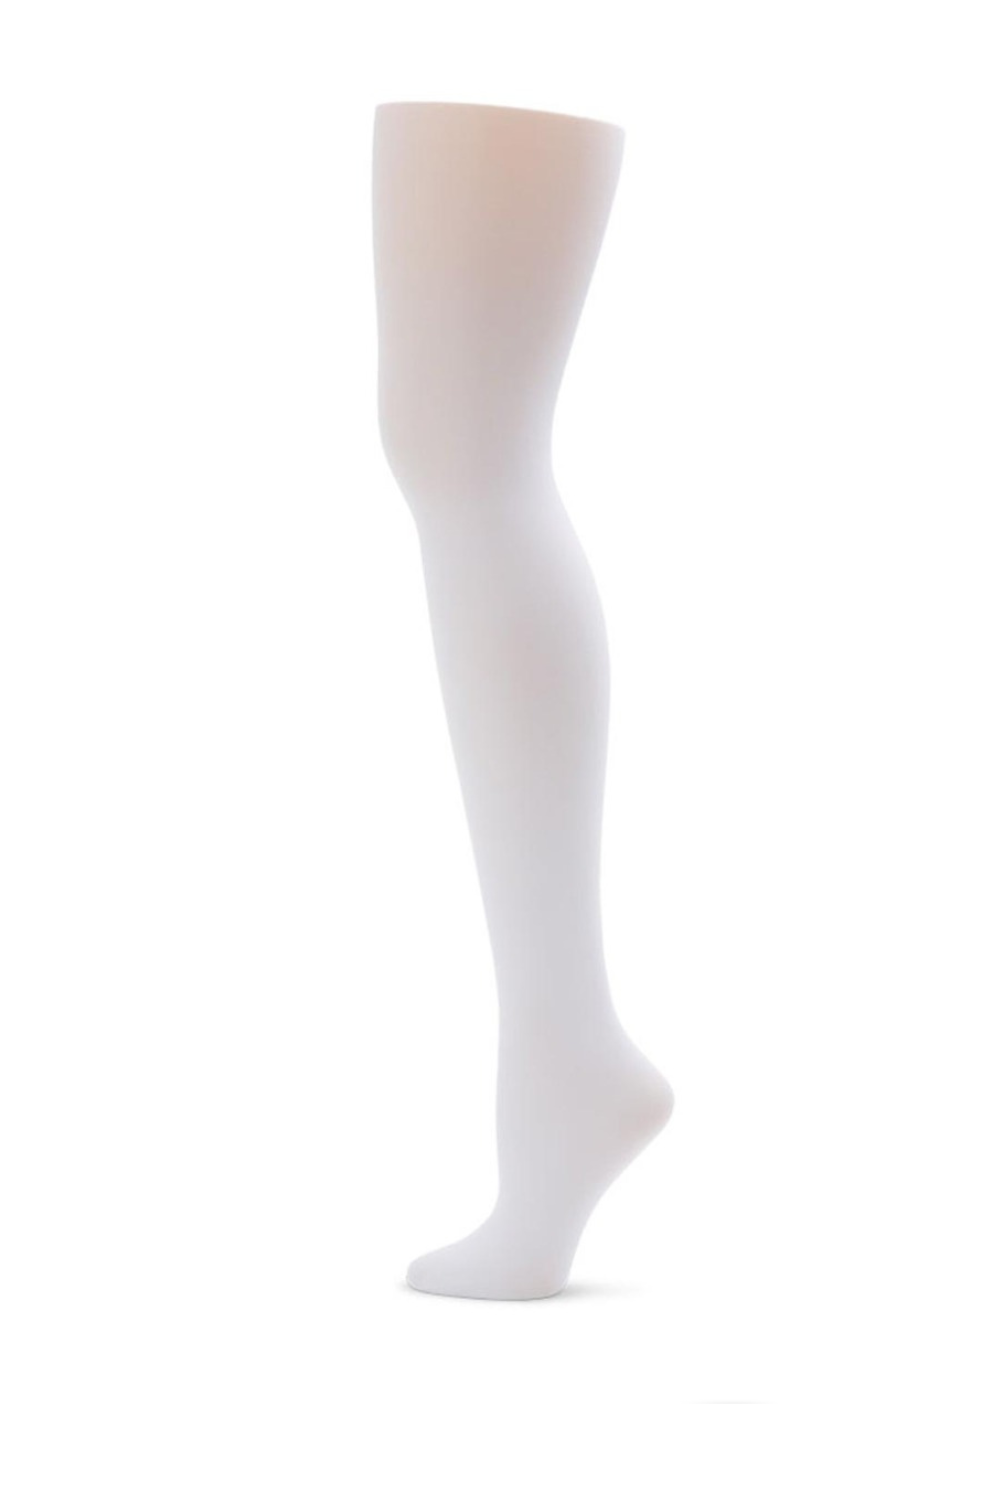 Capezio Child Ultra Soft%u2122 Footless Tight with Self Knit Waistband:  1917C